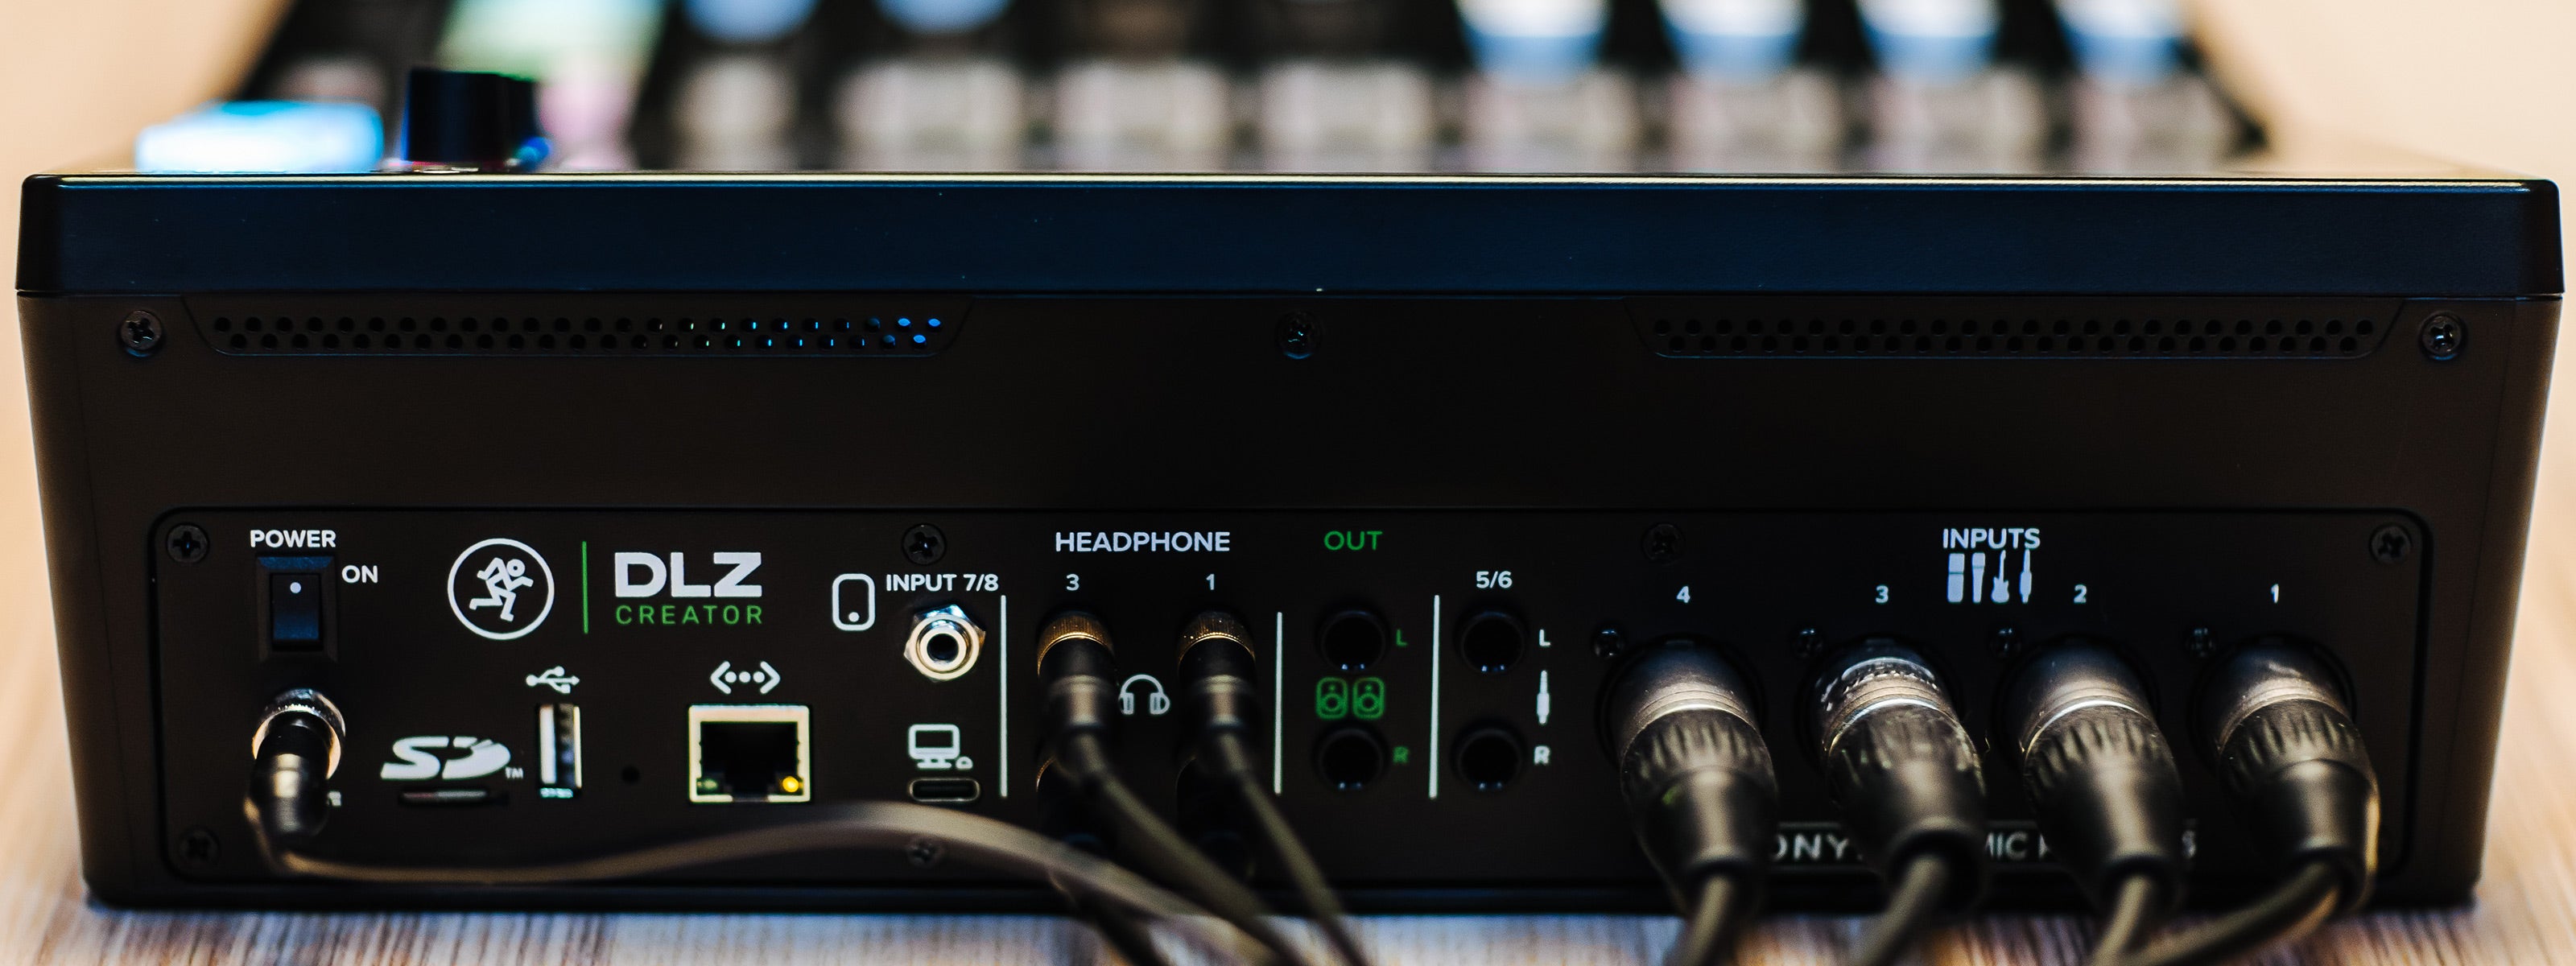 Mackie DLZ CREATOR  Adaptive Digital Mixer for Podcasting and Streaming